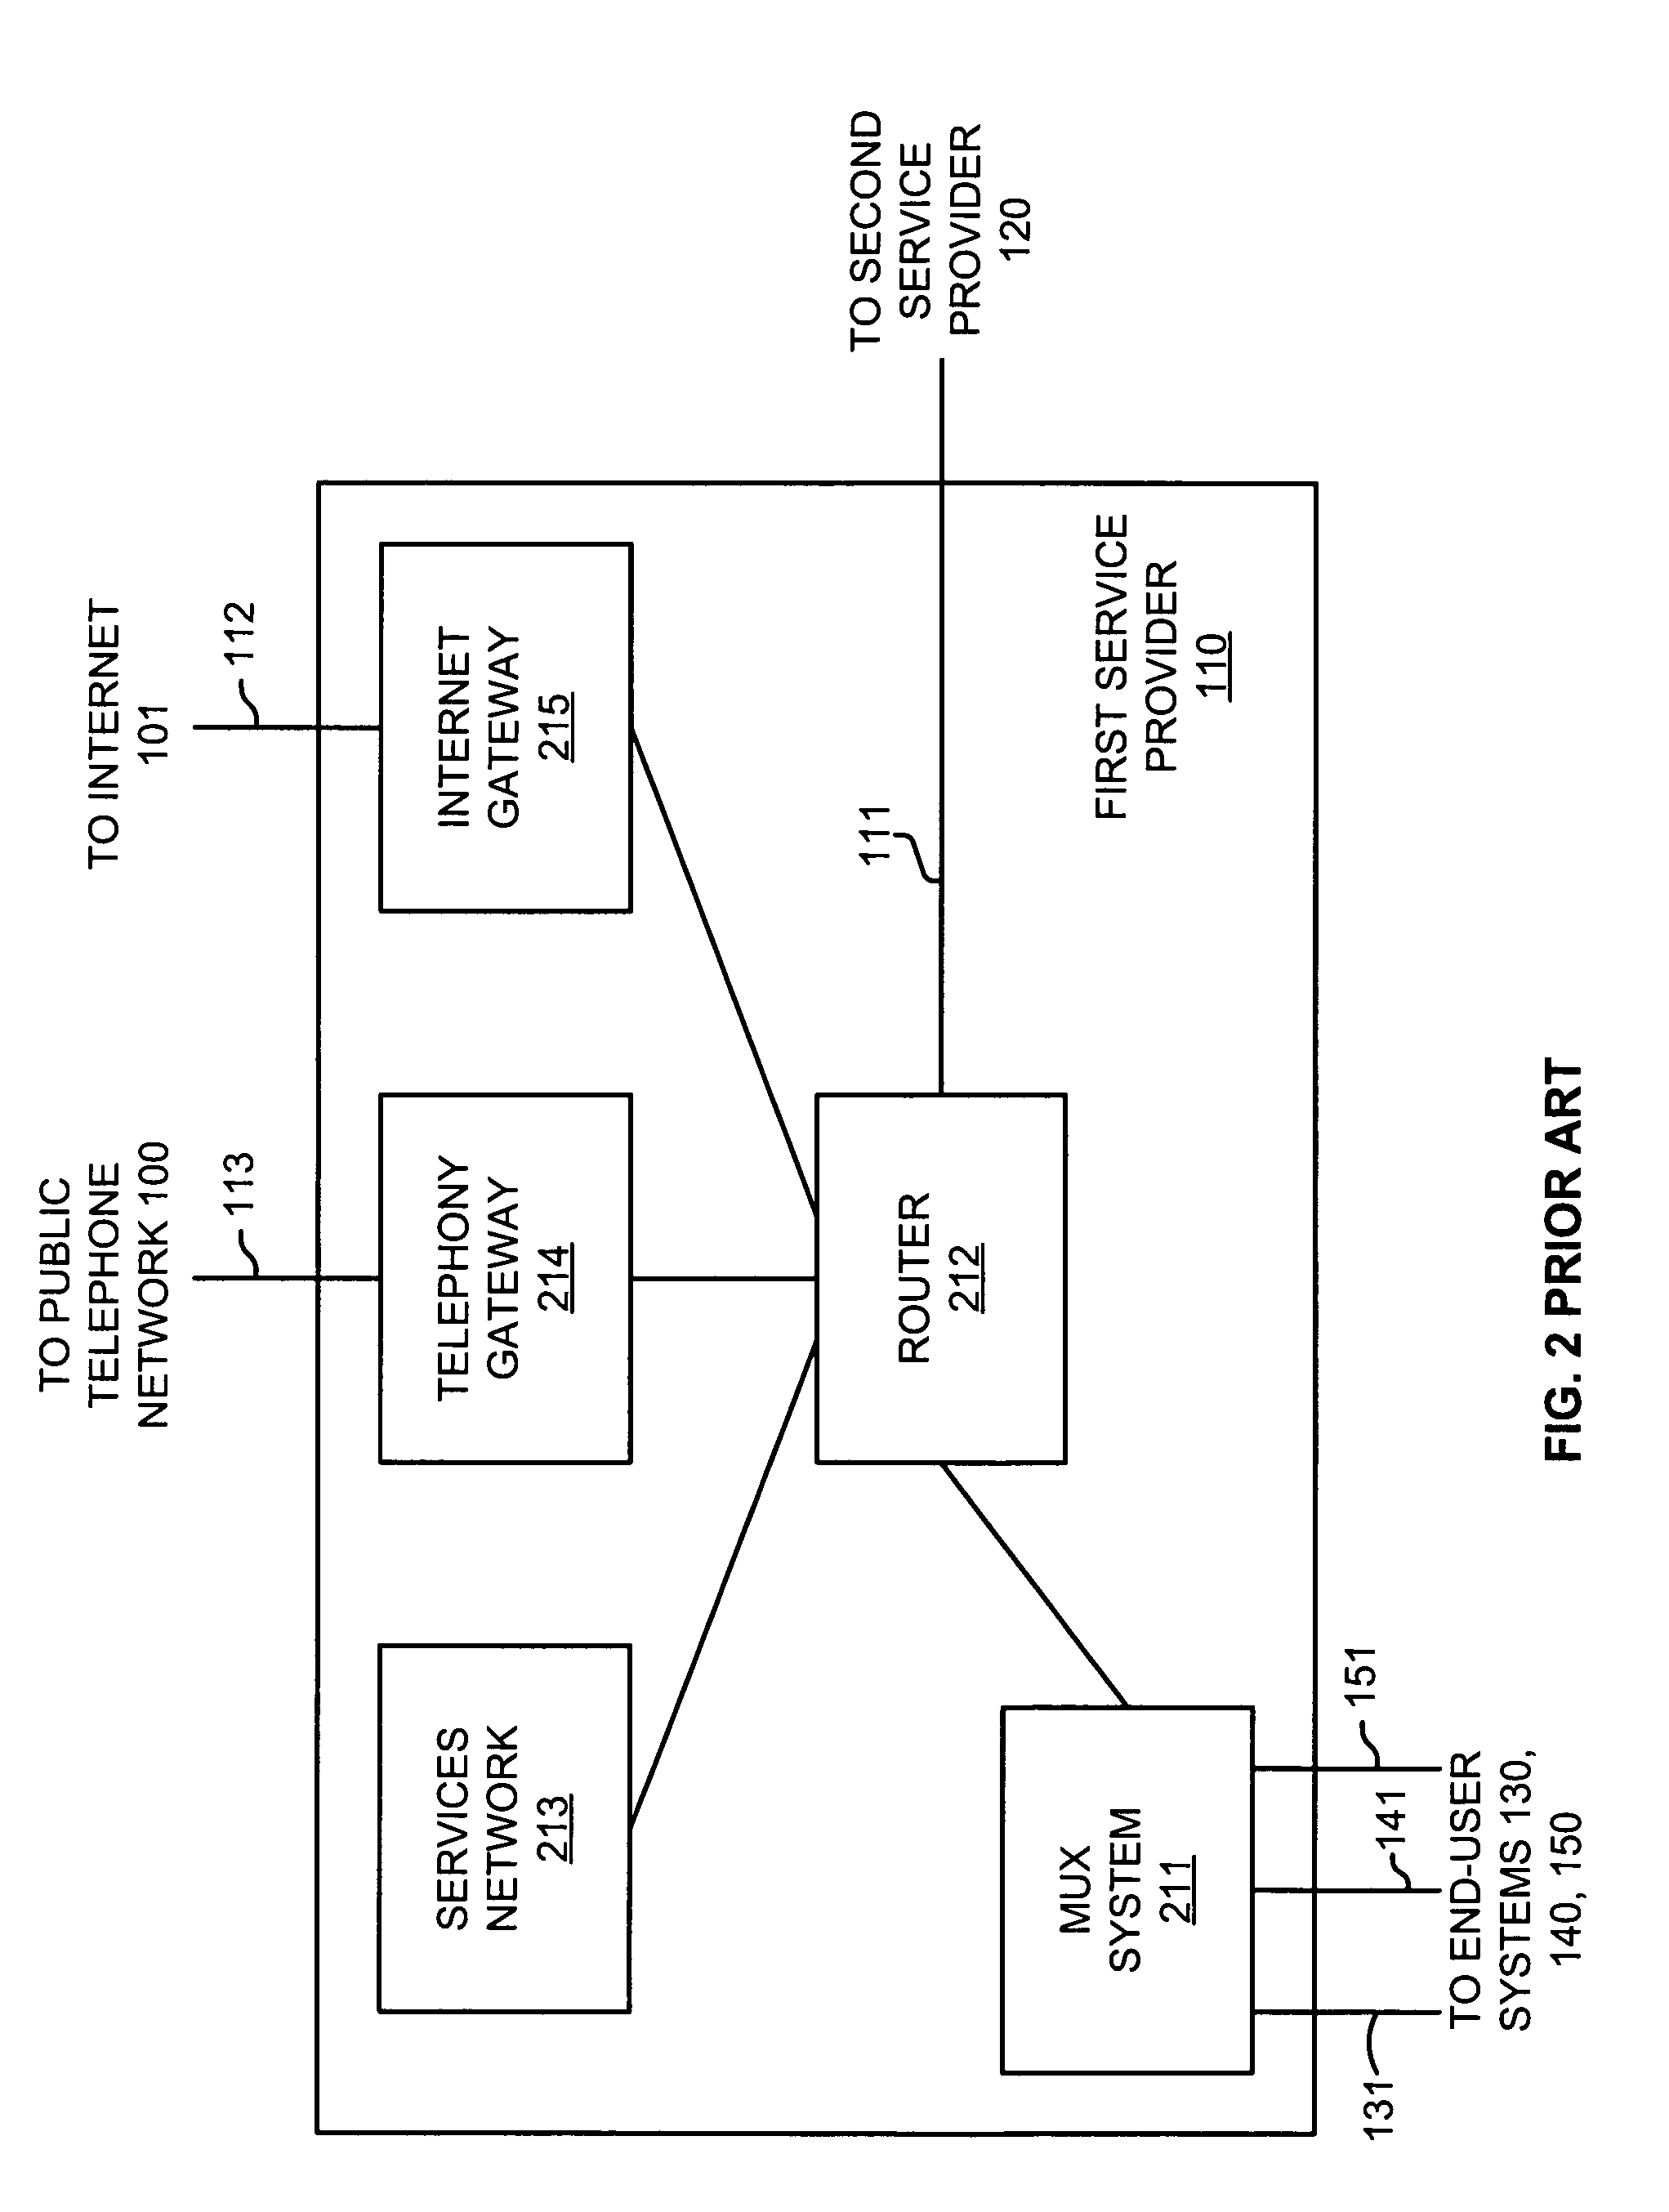 End-user systems for communication services over peer-to-peer internet protocol connections between service providers